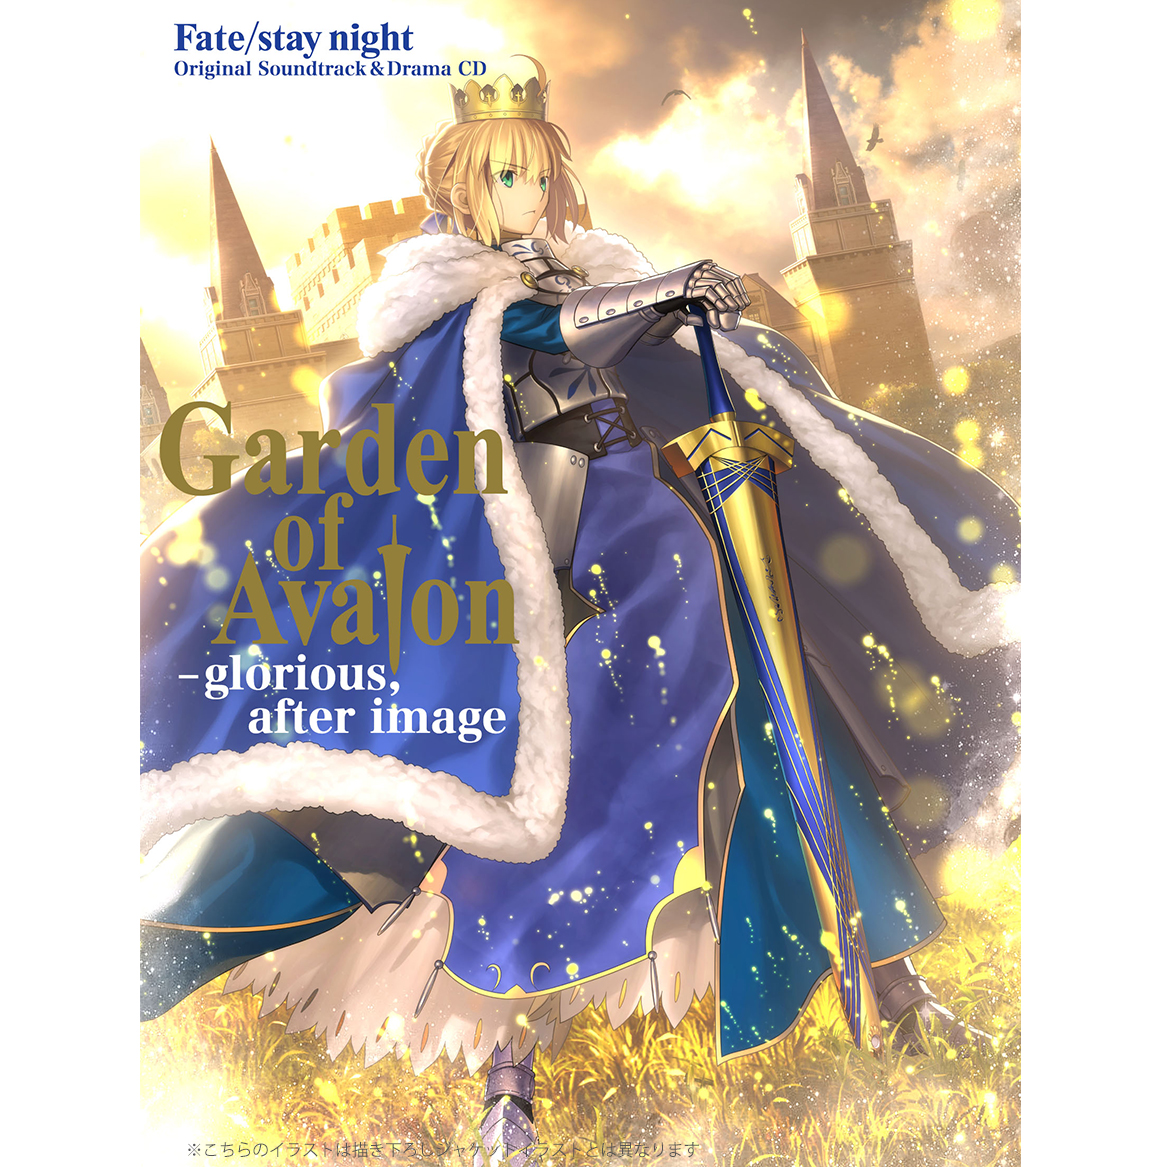 Fate/stay night Original Soundtrack & Drama CD Garden of Avalon - glorious,after image